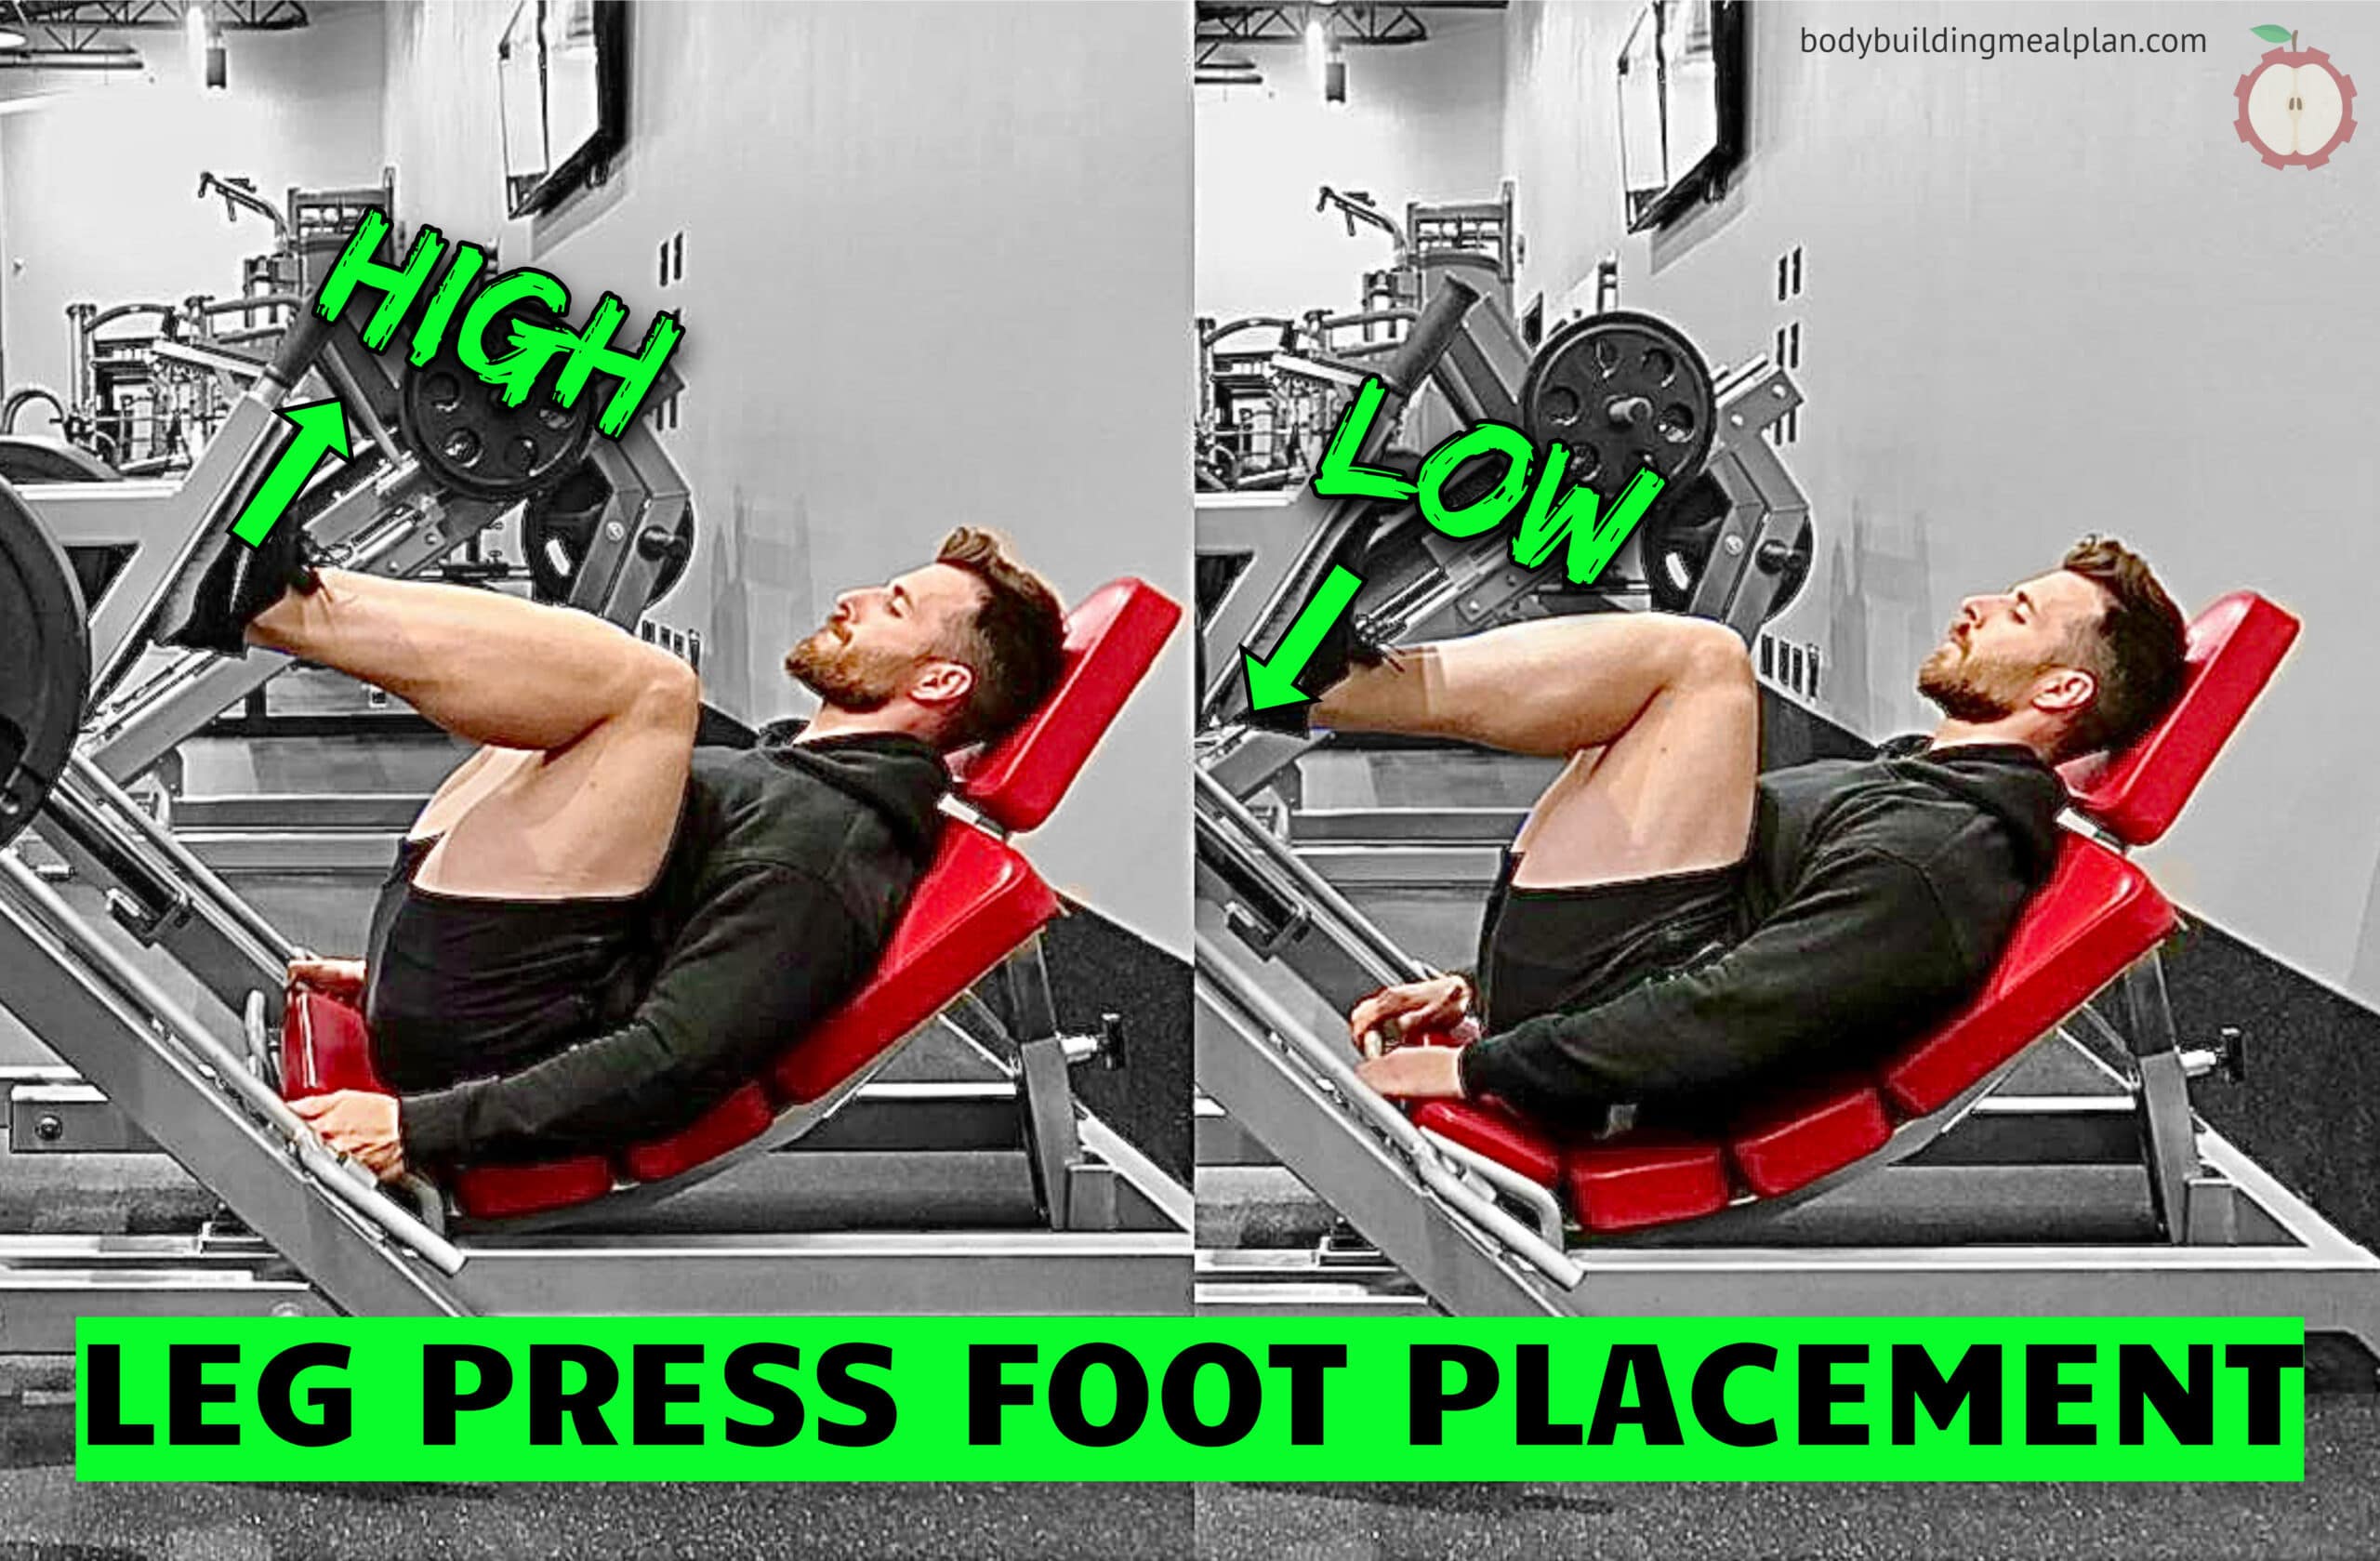 Leg Press Foot Placement For Glutes vs Quads